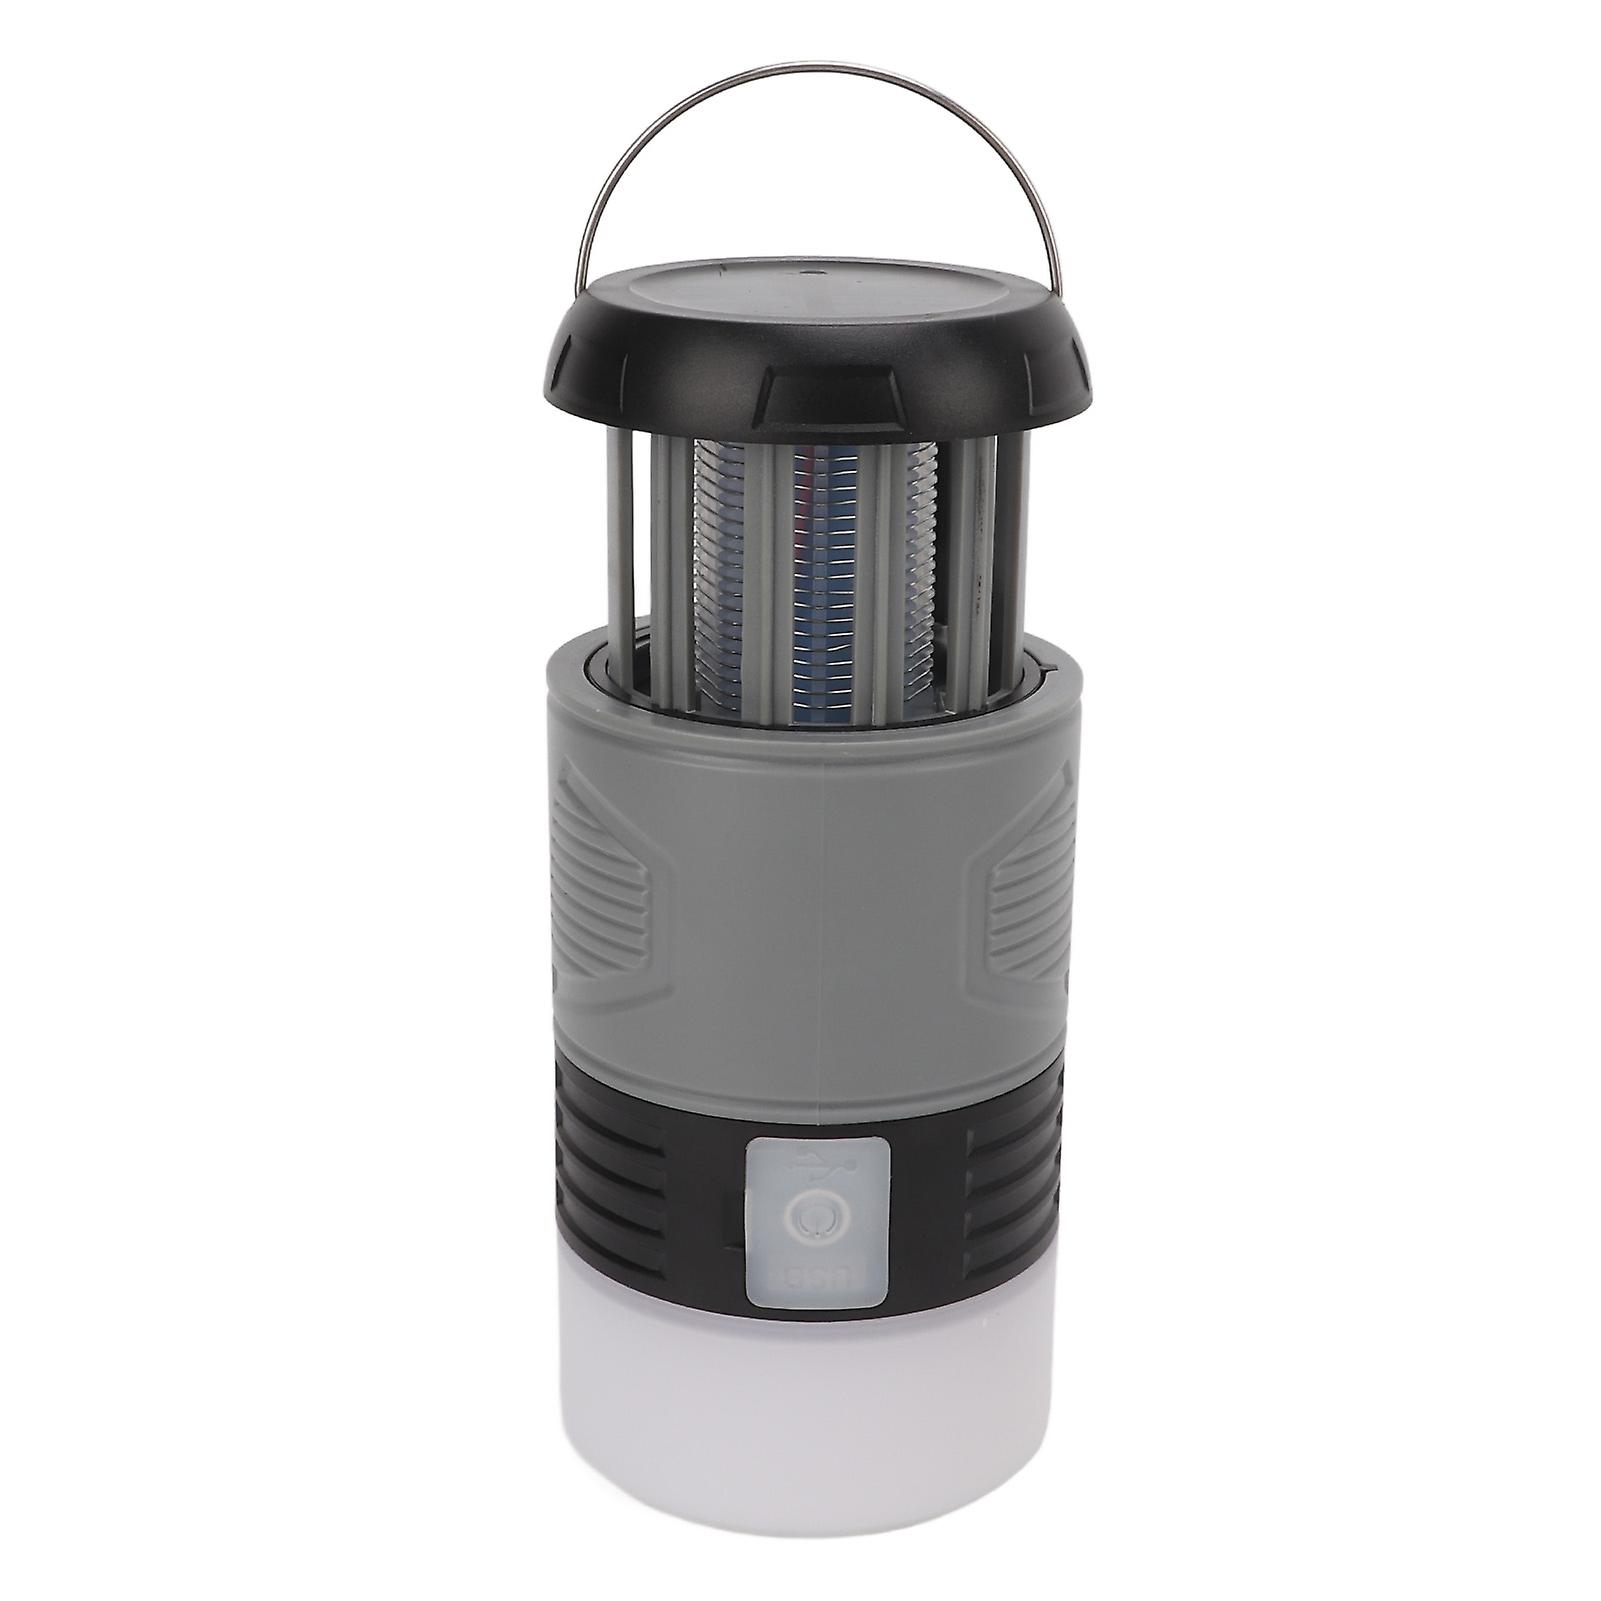 Camping Tent Led Lantern Mosquito Lamp 2 In 1 Stretchable Solor Powered Lamp Usb Rechargeable Led Light For Outdoor